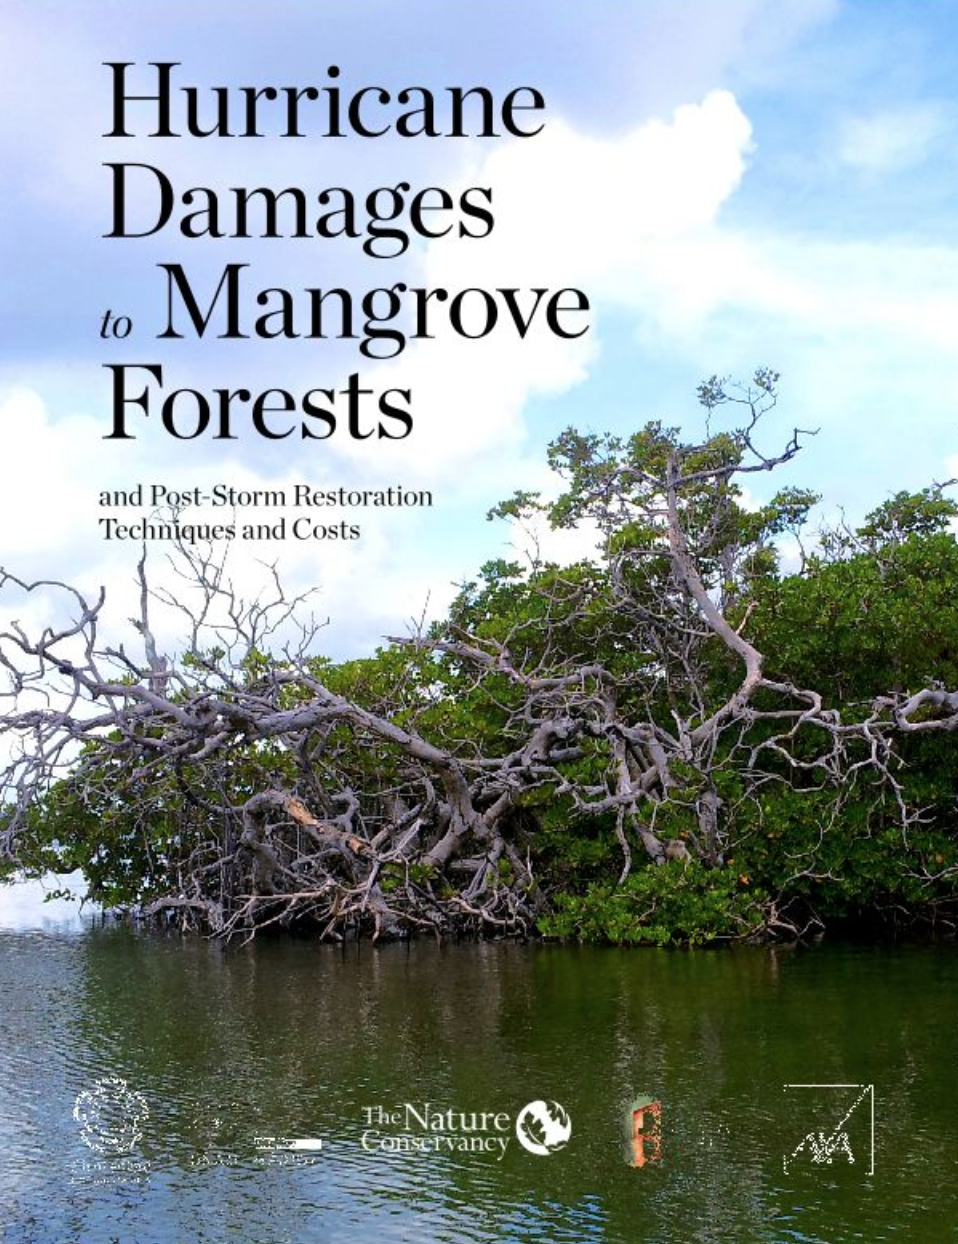 Text that Says Hurricane Damages to Mangrove Forests over a landscape image of mangroves.